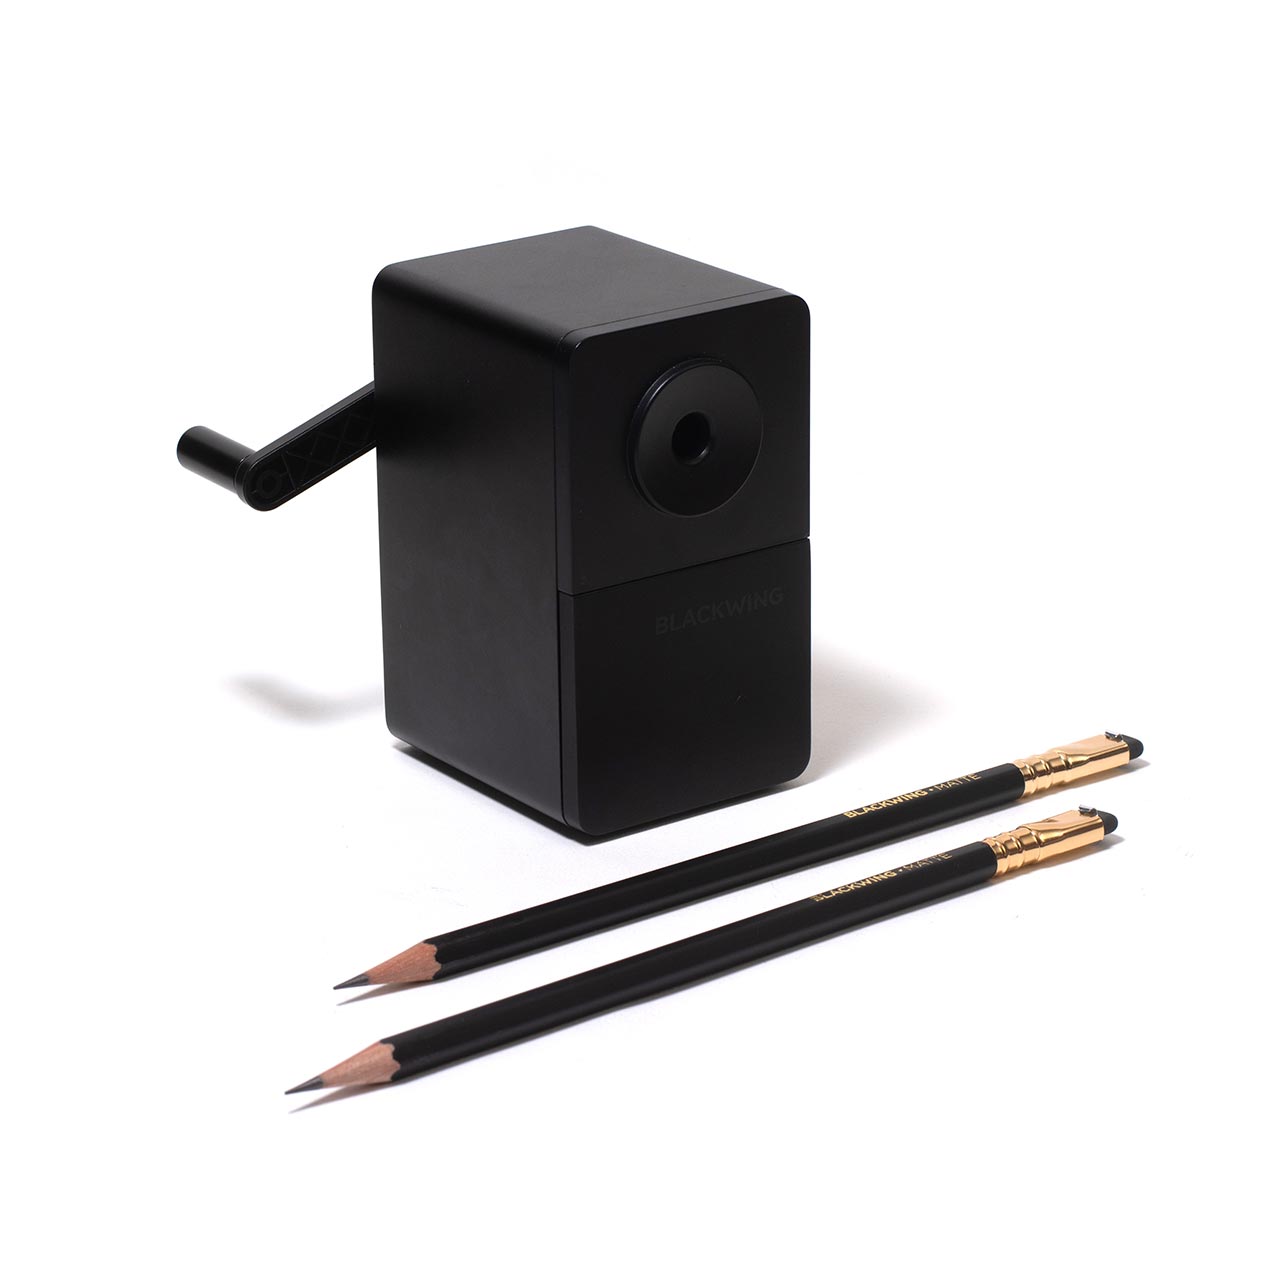 Handheld Pencil Sharpeners: The Complete Guide - The Art of